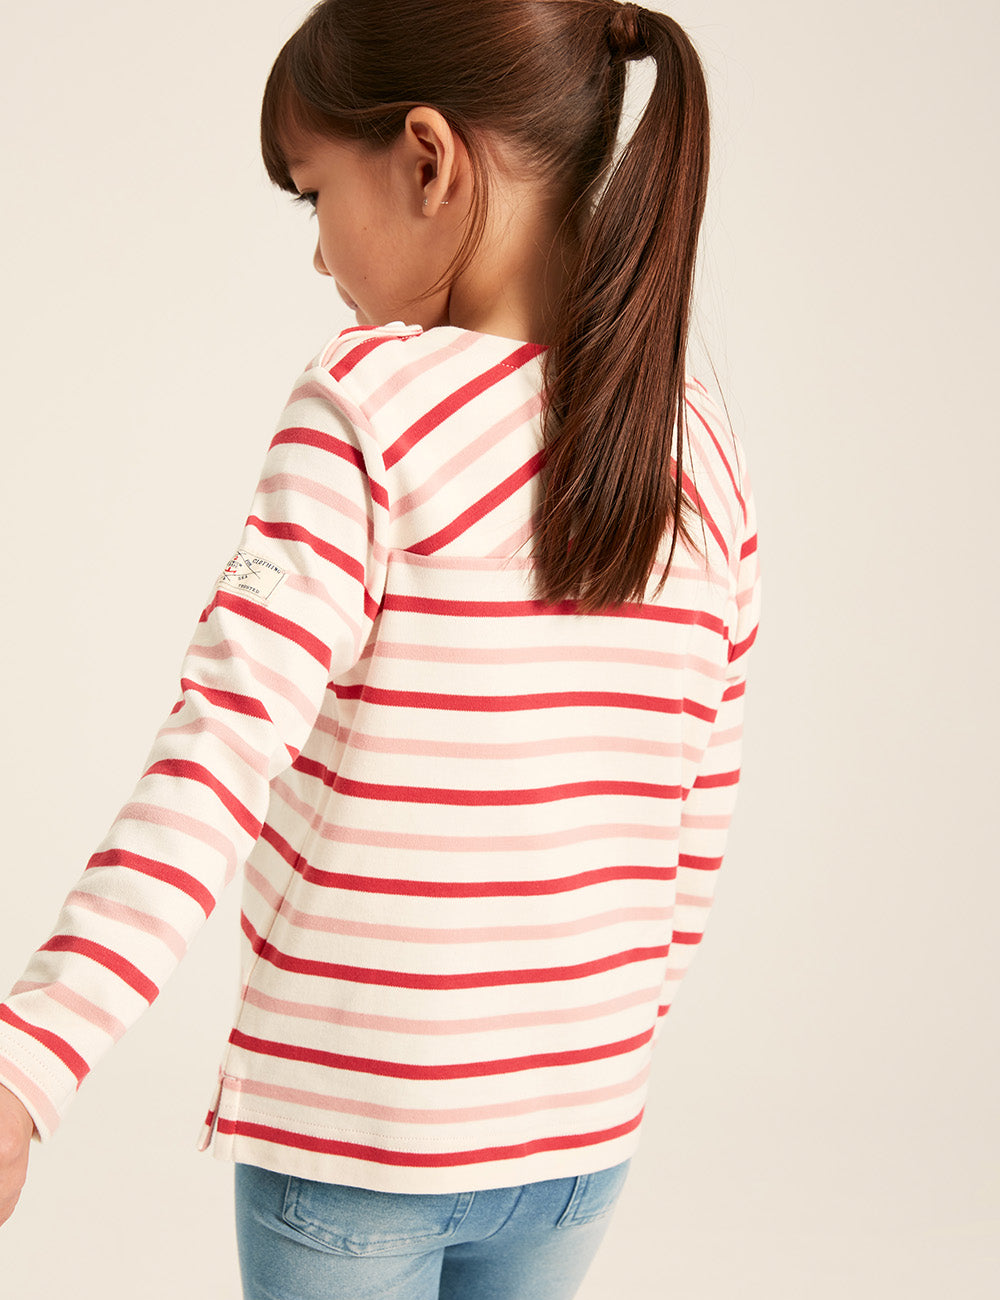 Joules Harbour Long Sleeve T-Shirt - Cream/Pink Stripe